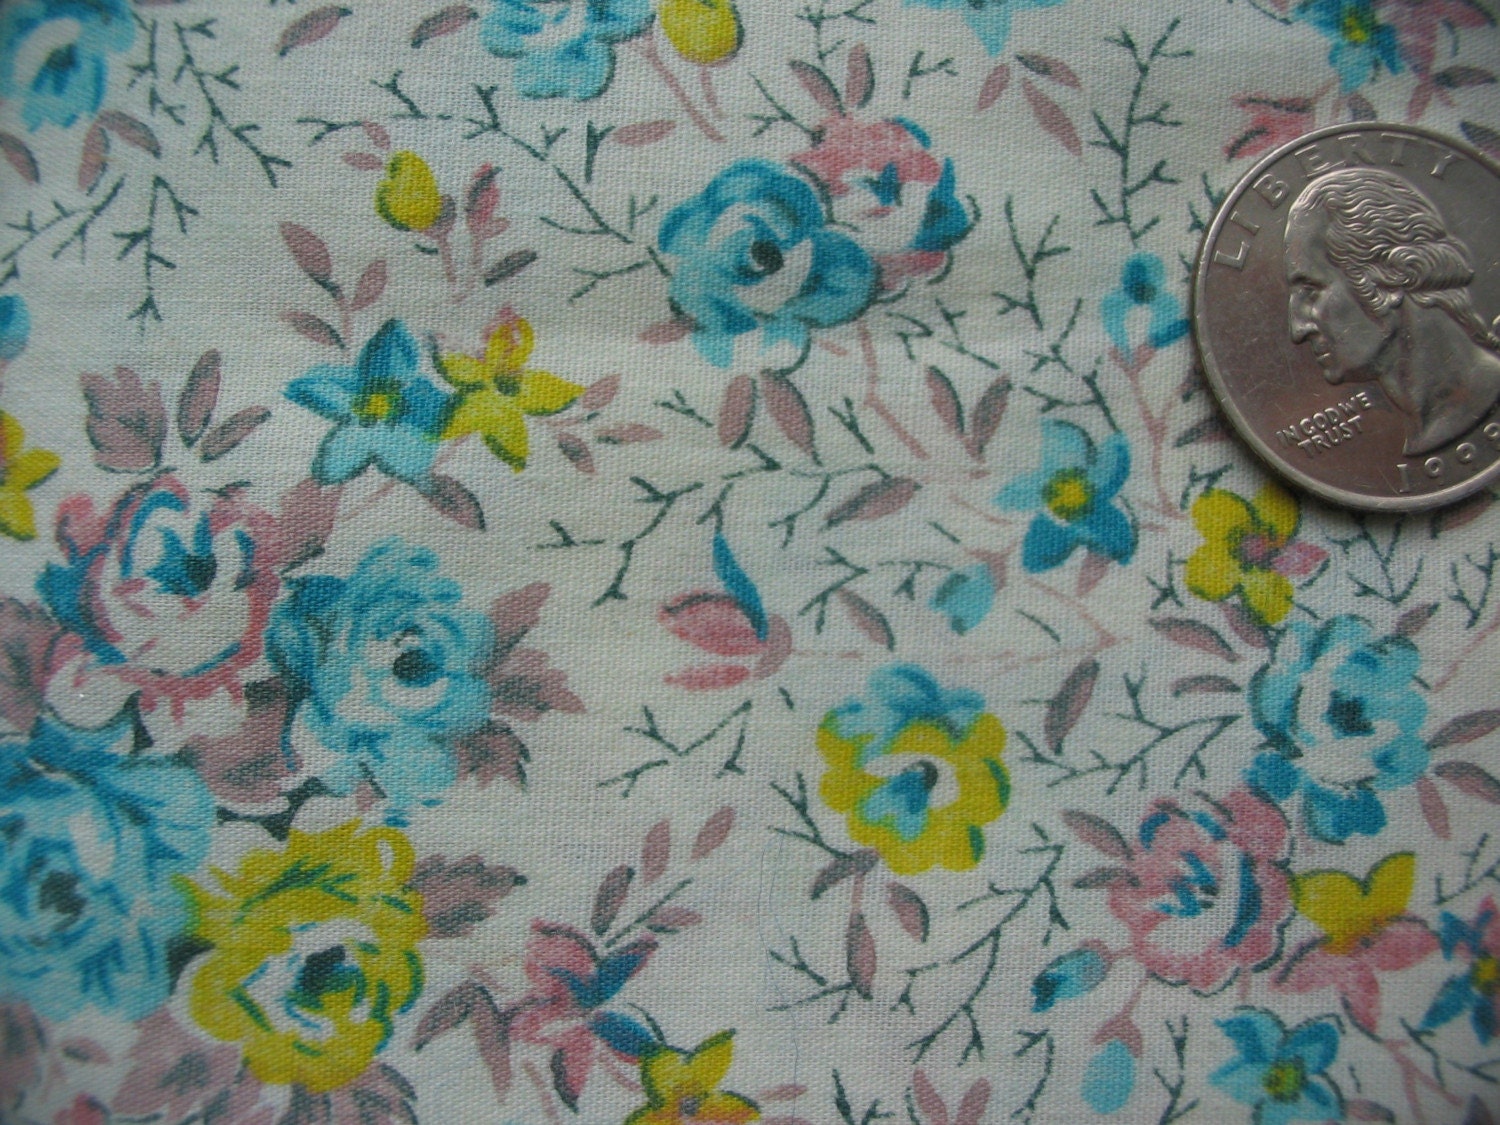 Vintage 1970s 1960s Calico Quilt Fabric Aqua Blue Pink and Yellow  Roses on Light Aqua 18 inches 45.7 Centimeters